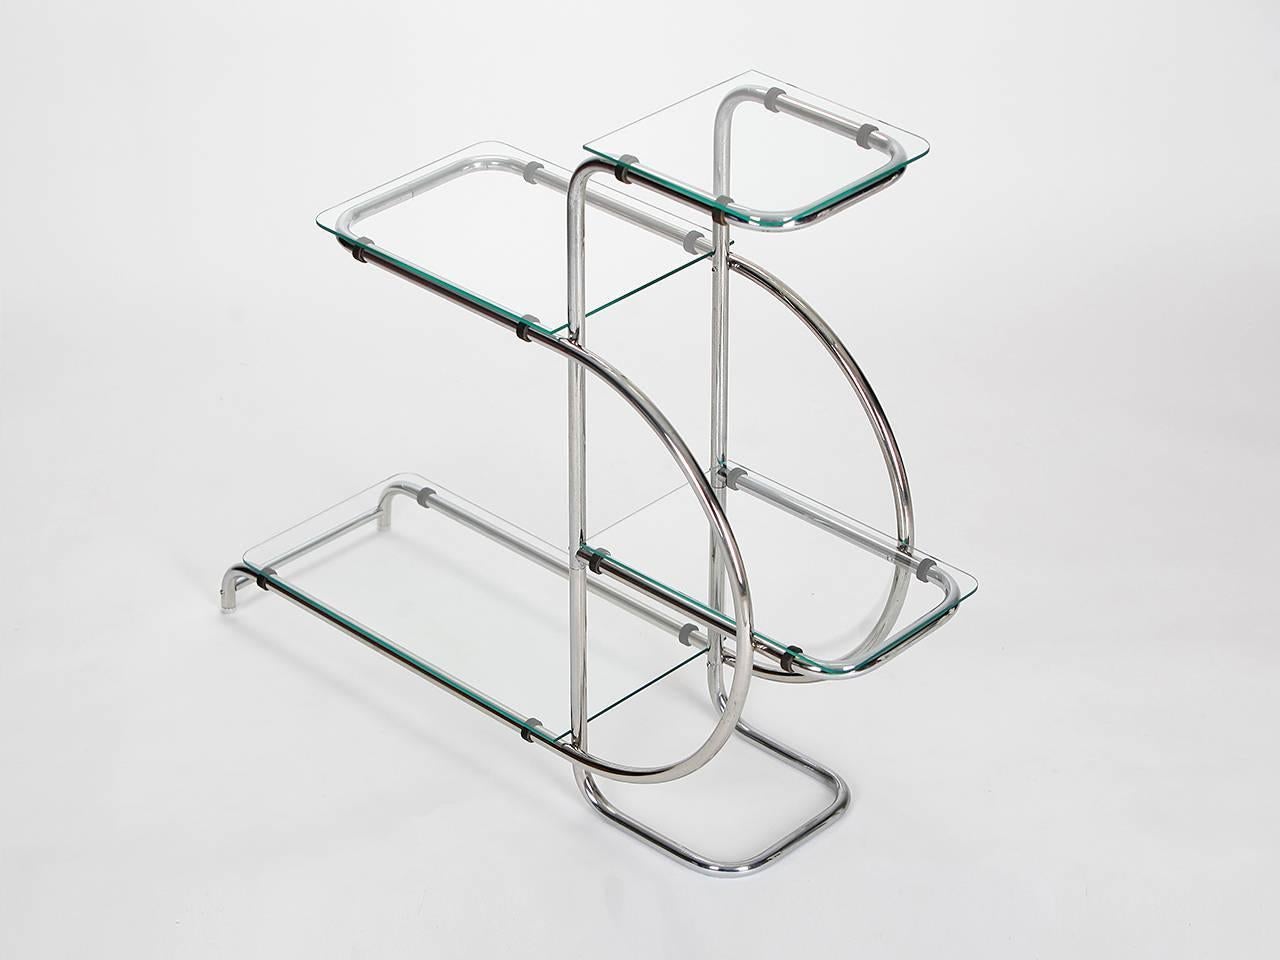 This étagère, with a frame of bent steel tube and glass shelves, was made in the 1930s in the Czech Republic. Original chromium plating in a very nice original condition. Glass plates renewed.

We offer shop to door delivery worldwide. Please ask